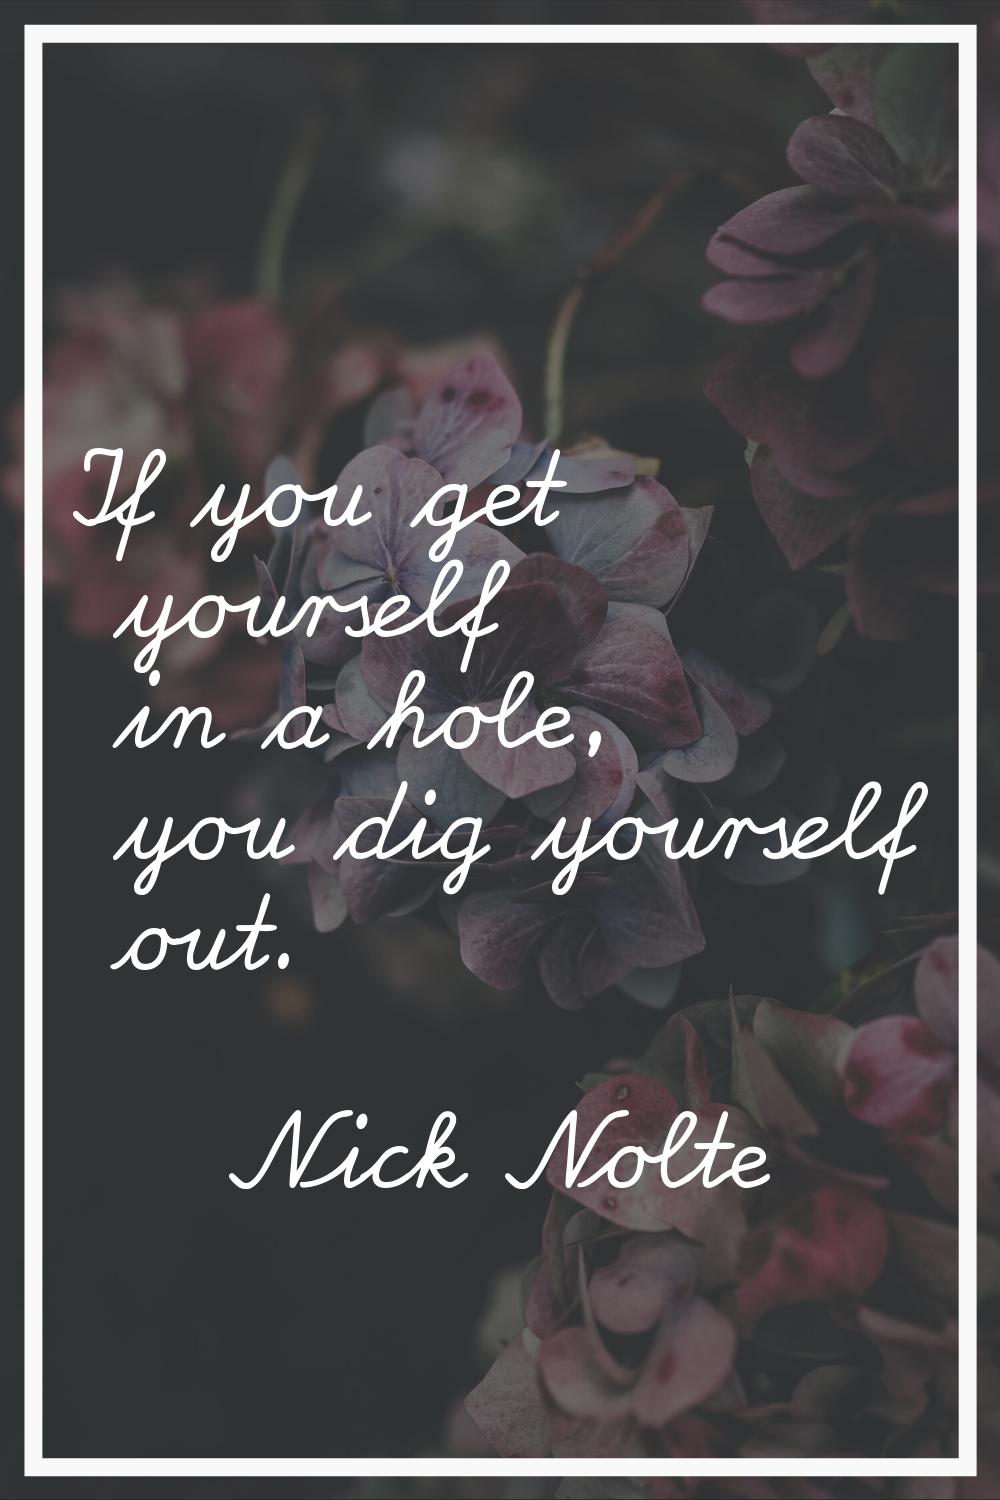 If you get yourself in a hole, you dig yourself out.